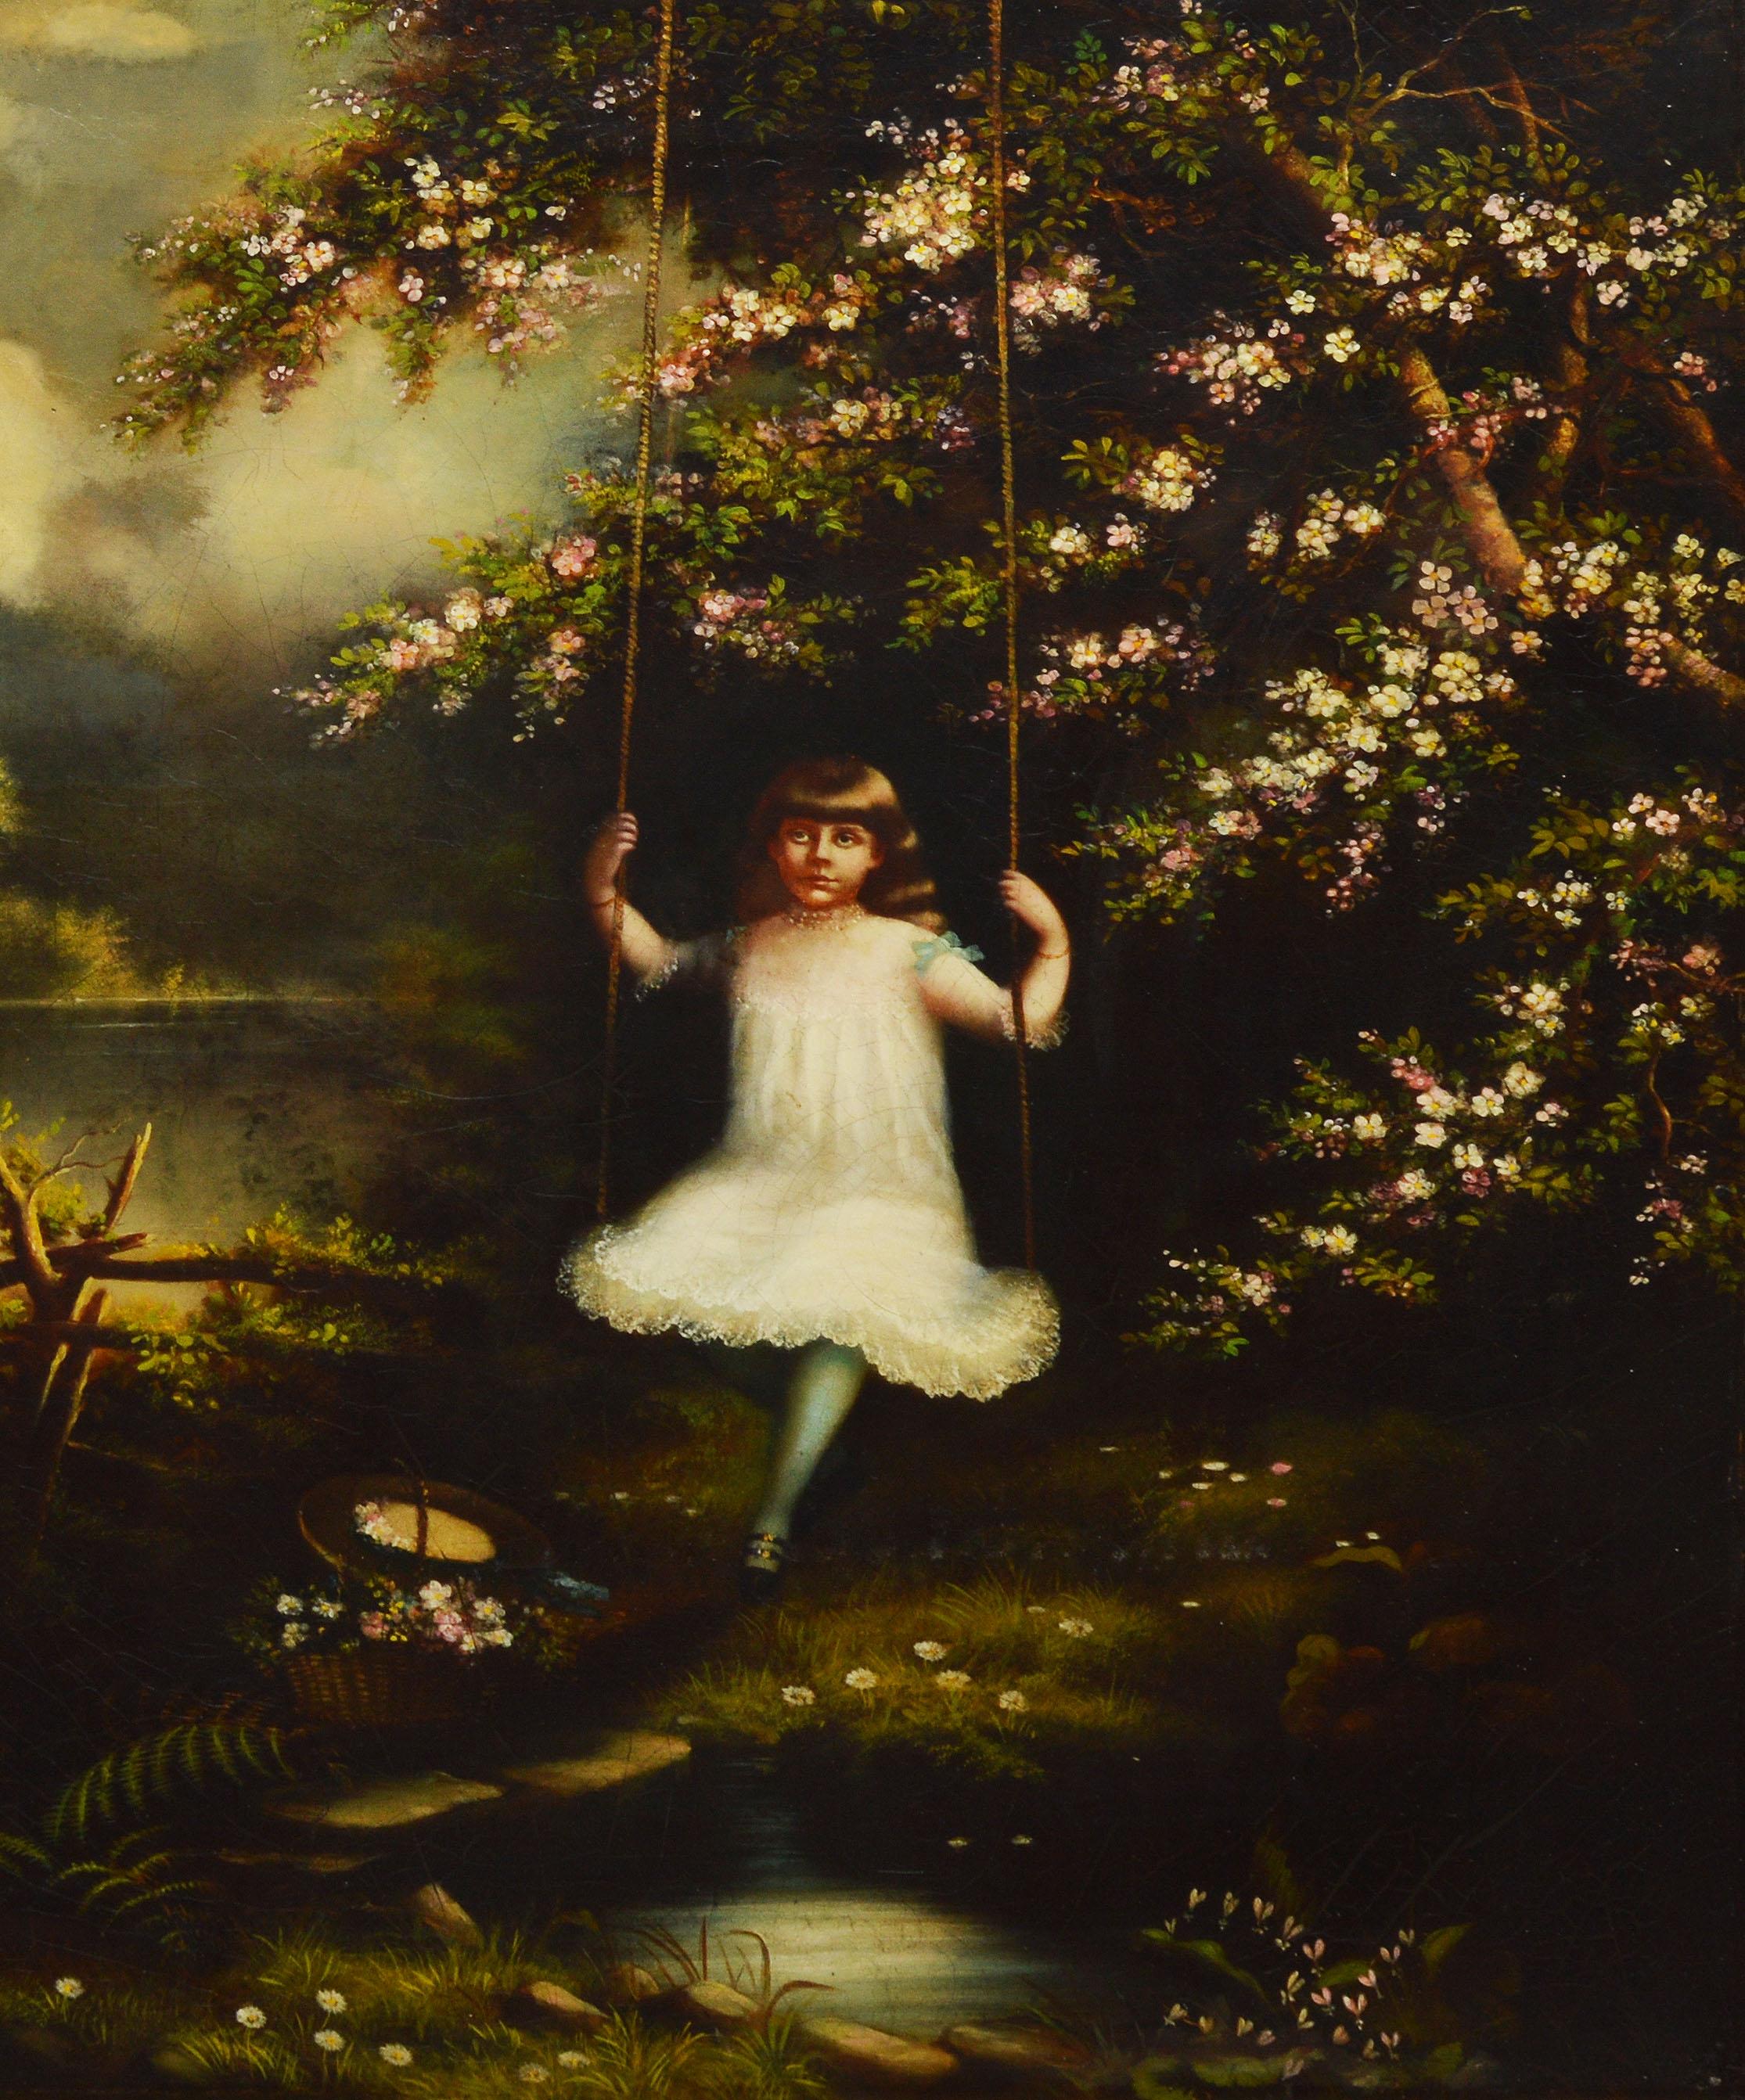 American School landscape with a girl swinging by a river.  Oil on canvas, circa 1870.  Unsigned.  Displayed in a giltwood frame.  Image size, 23